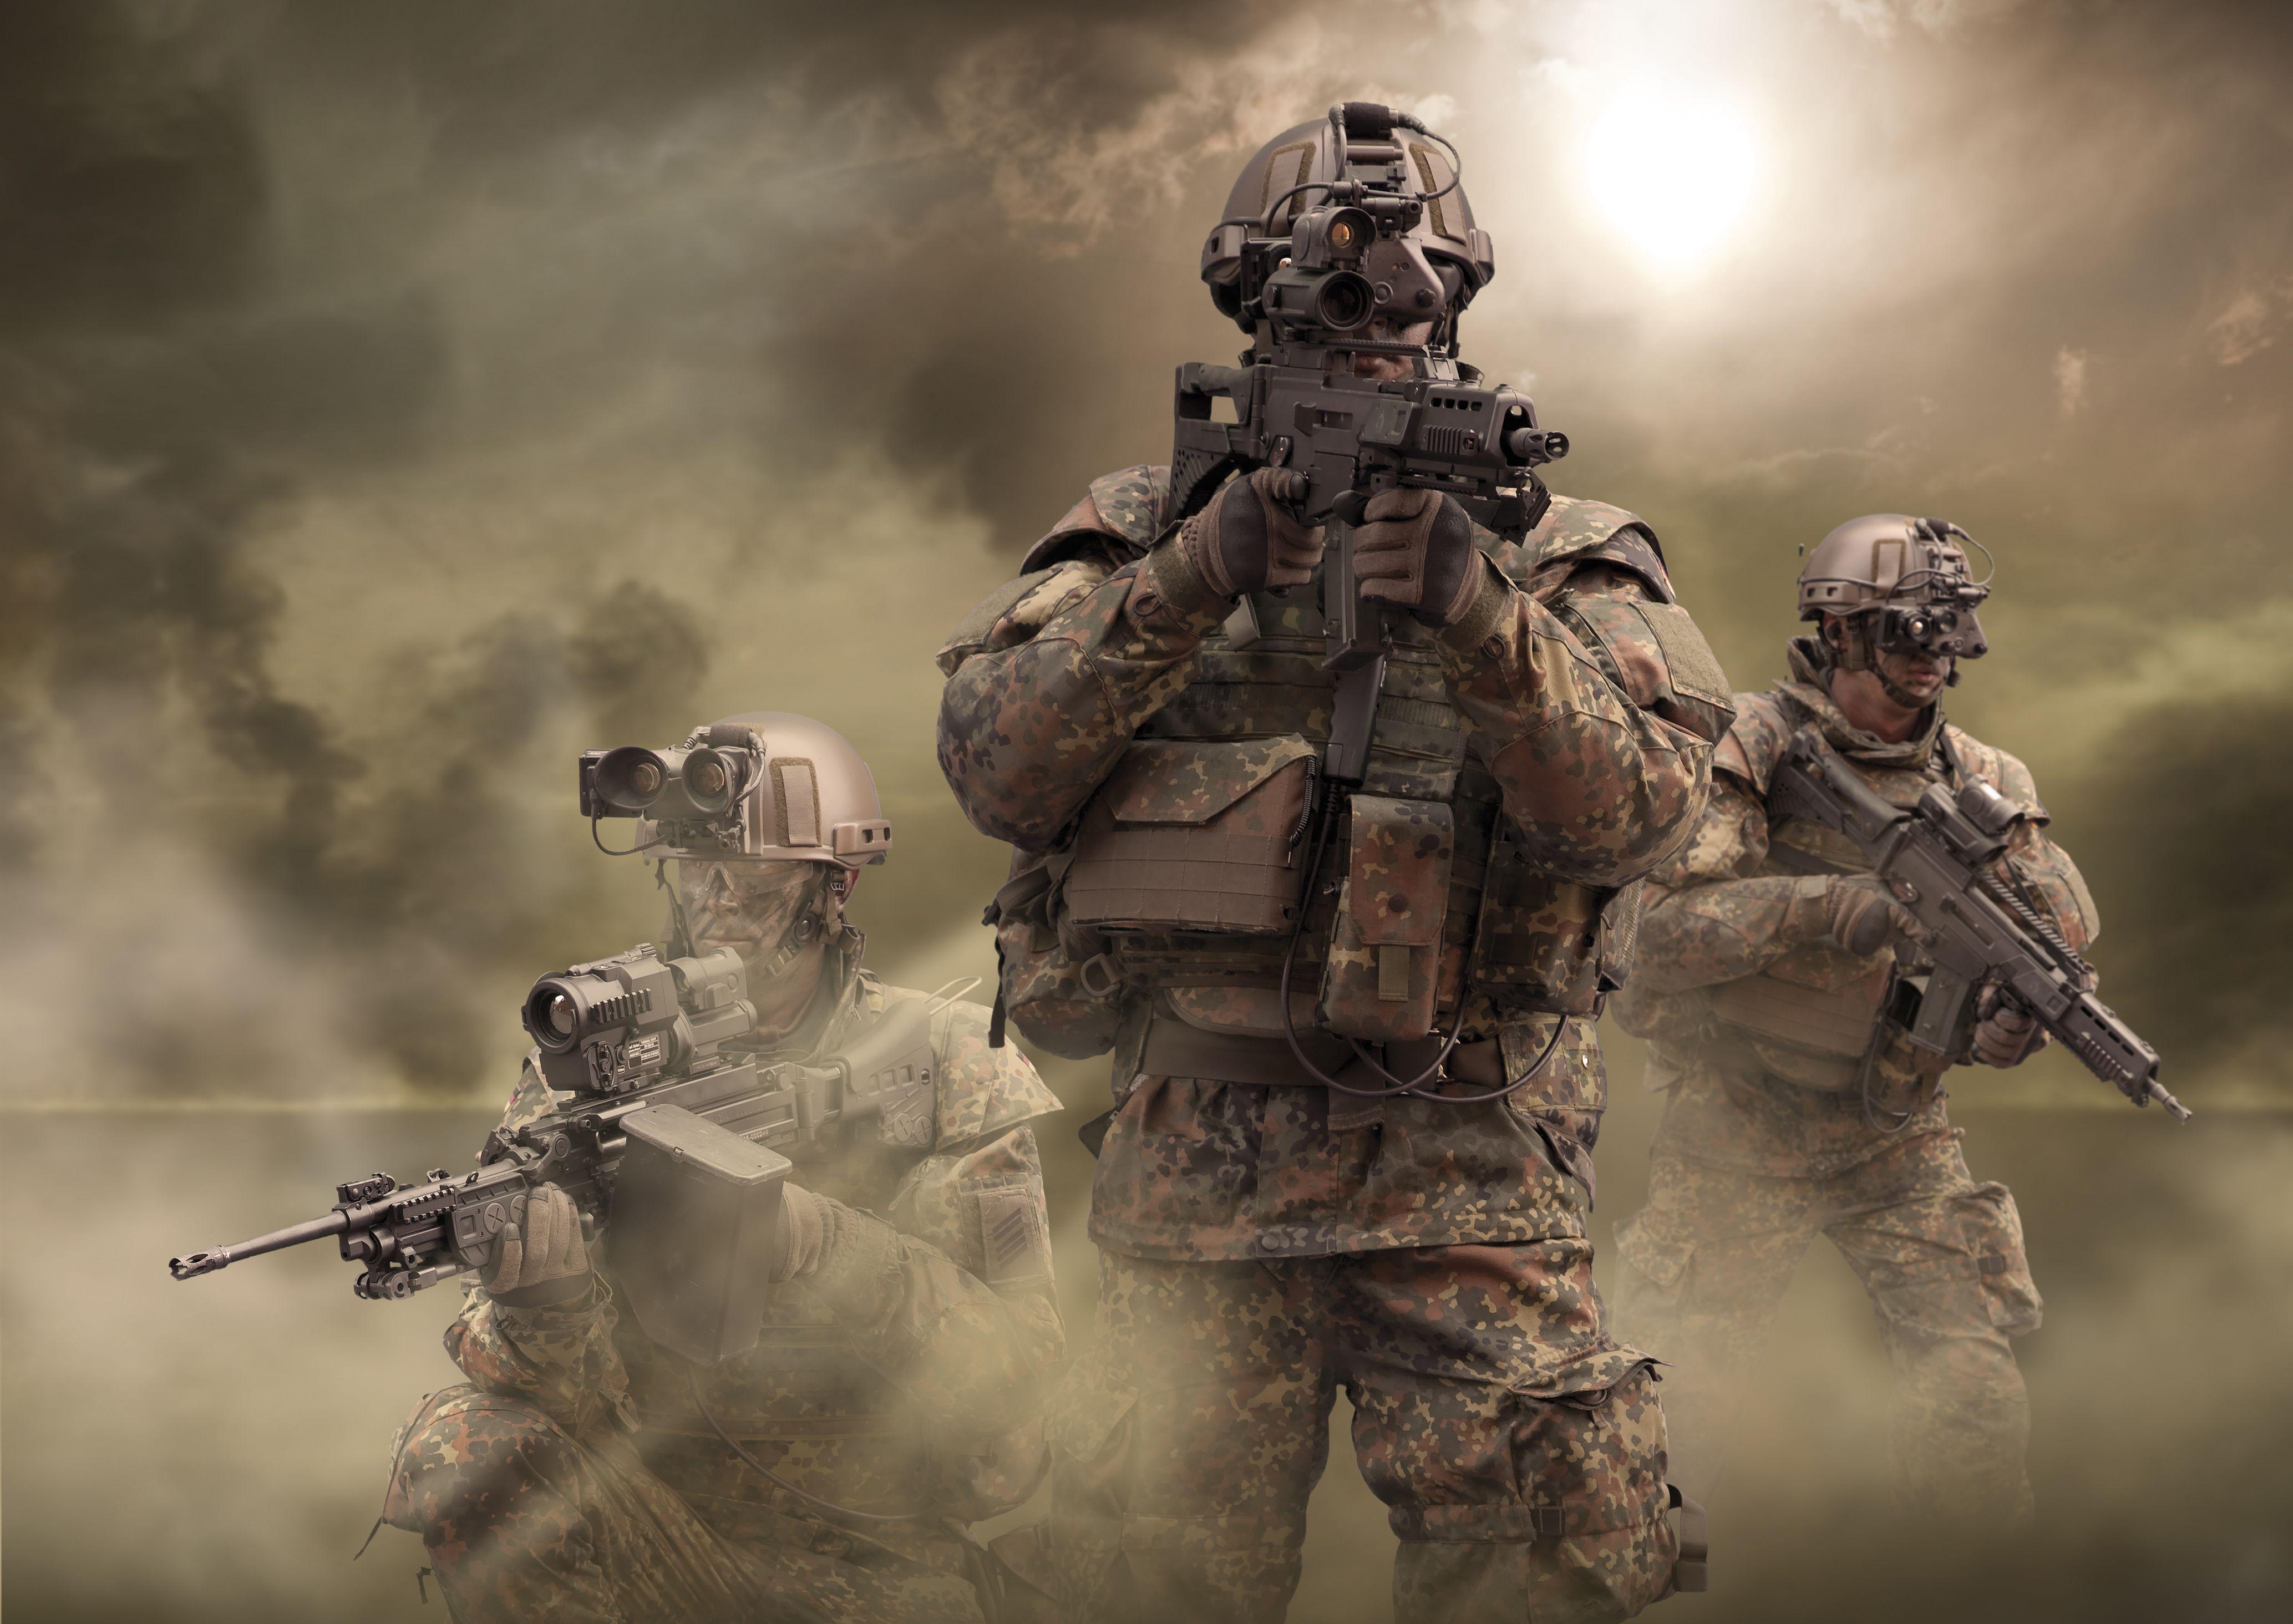 75th Infantry Ranger wallpaper by Xwalls  Download on ZEDGE  d953